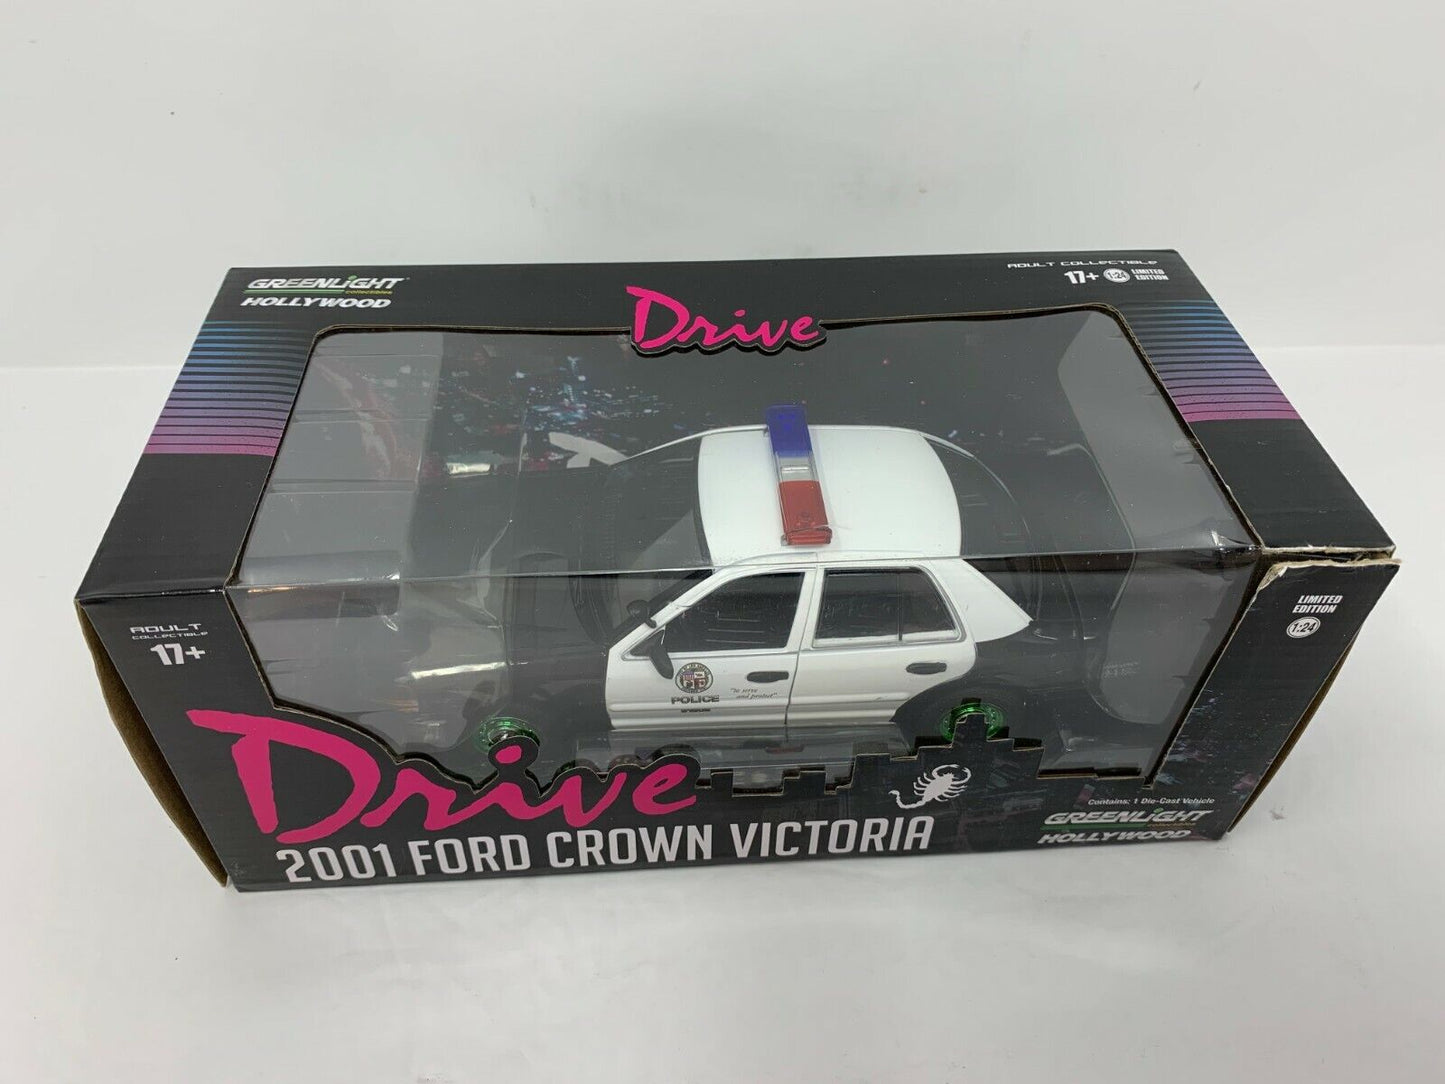 Greenlight Hollywood Drive 2001 Ford Crown Victoria Green Machine 1:24 Diecast